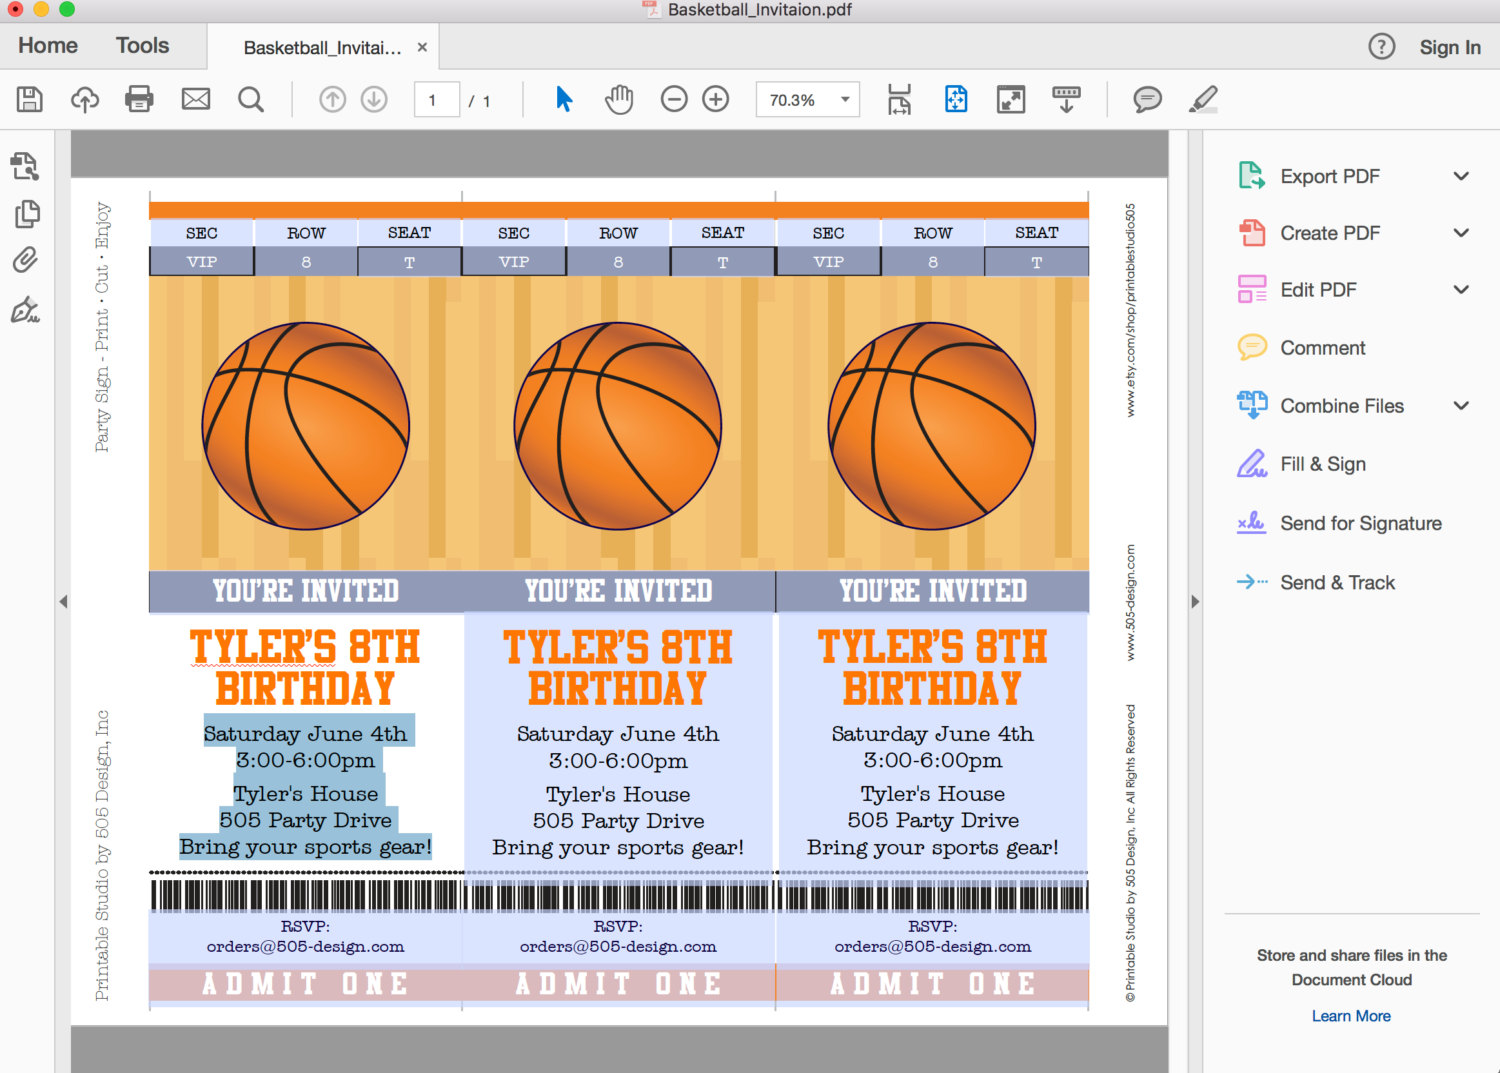 8+ Basketball Ticket Invitation Card Designs & Templates - PSD, AI,  InDesign, Word, Publisher